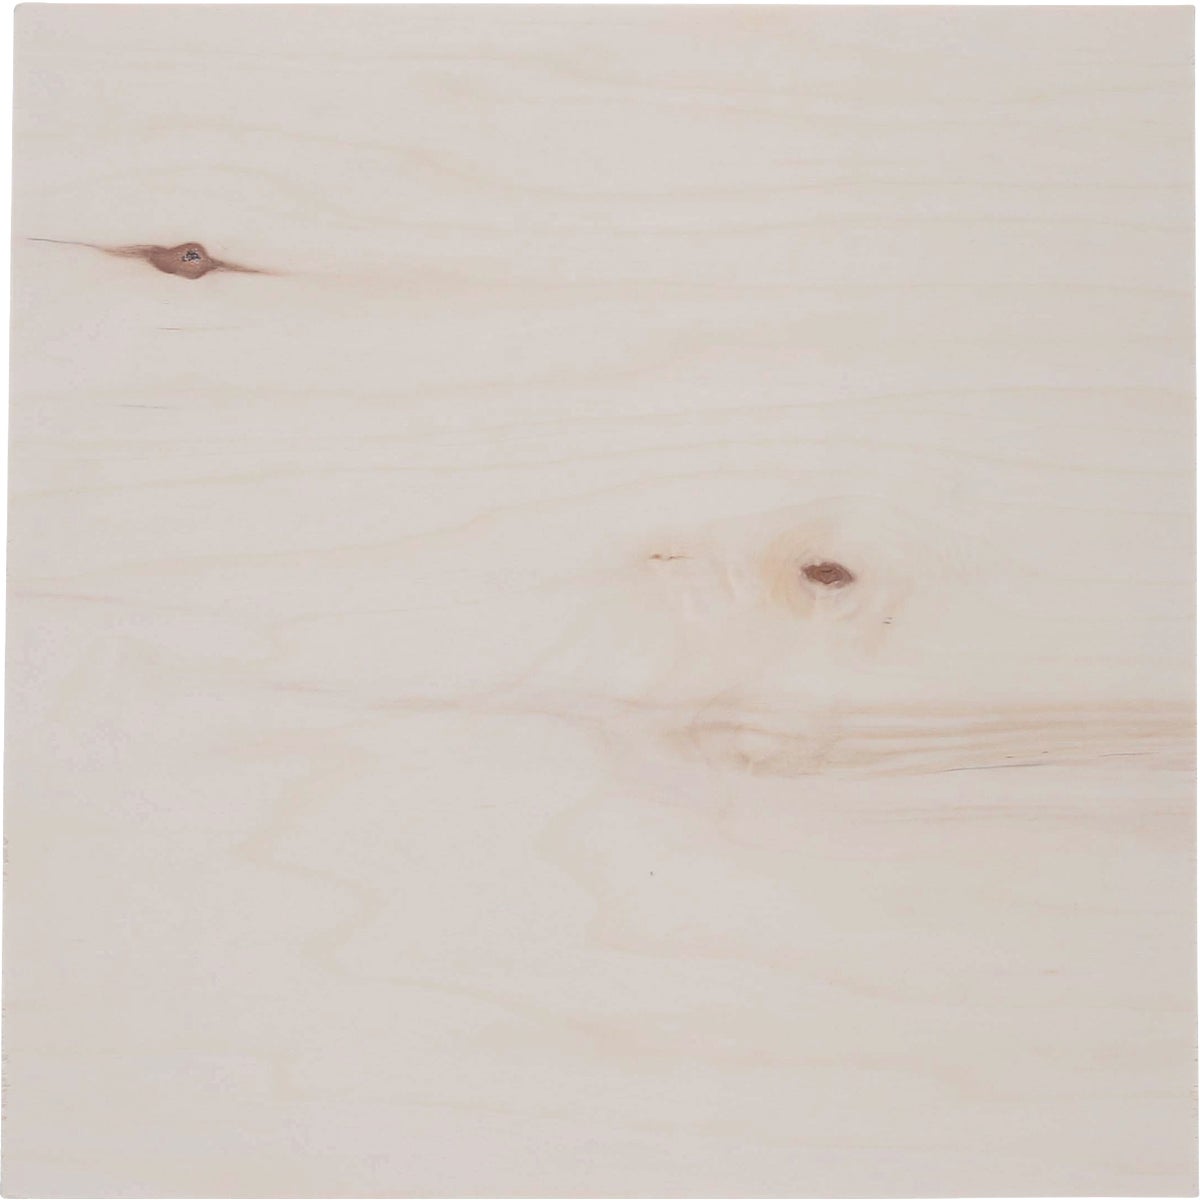 Midwest Products 1/8 In. x 12 In. x 12 In. Aspen Plywood